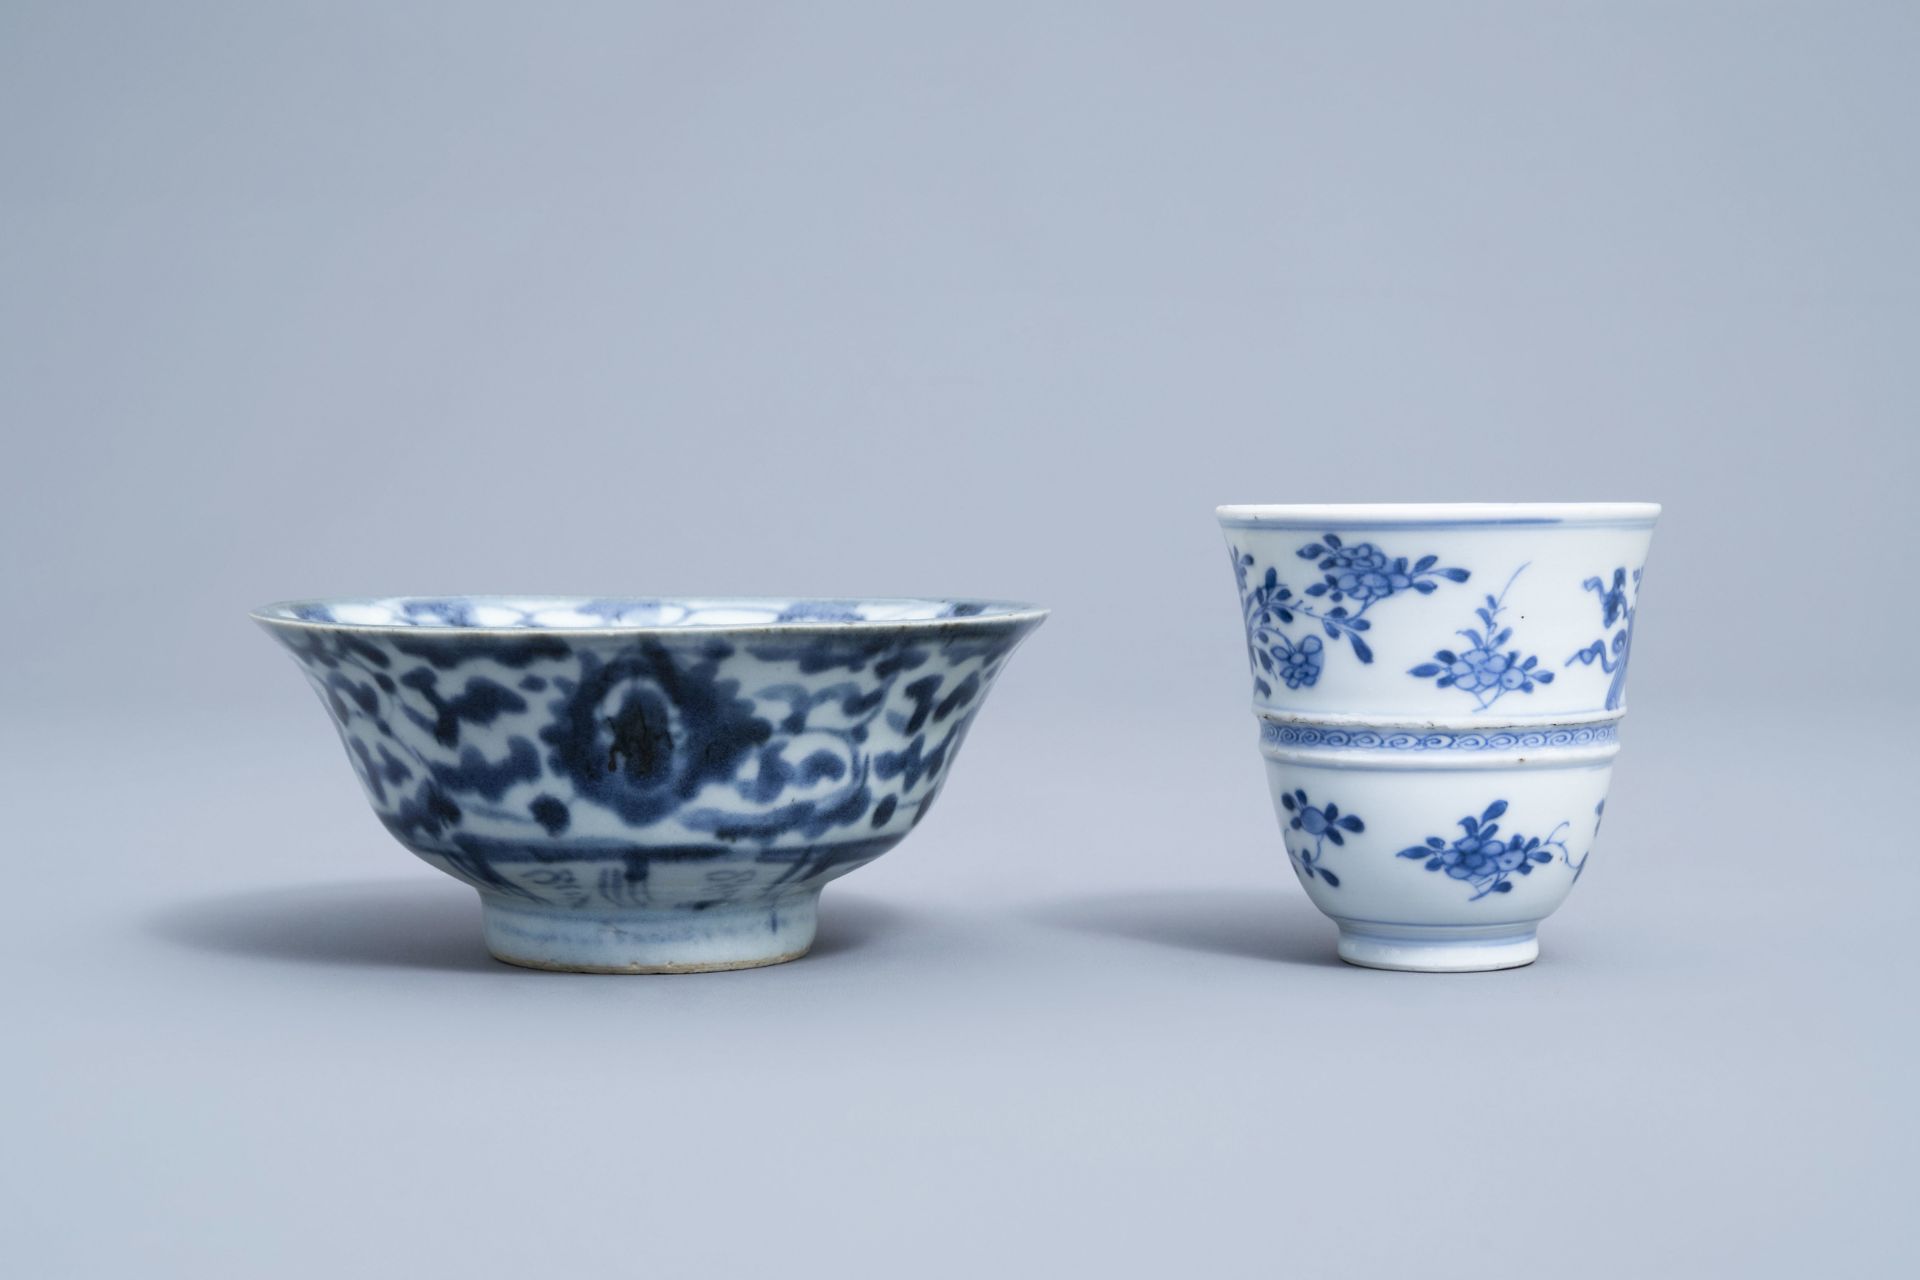 A varied collection of Chinese blue and white porcelain, 18th C. and later - Image 26 of 54